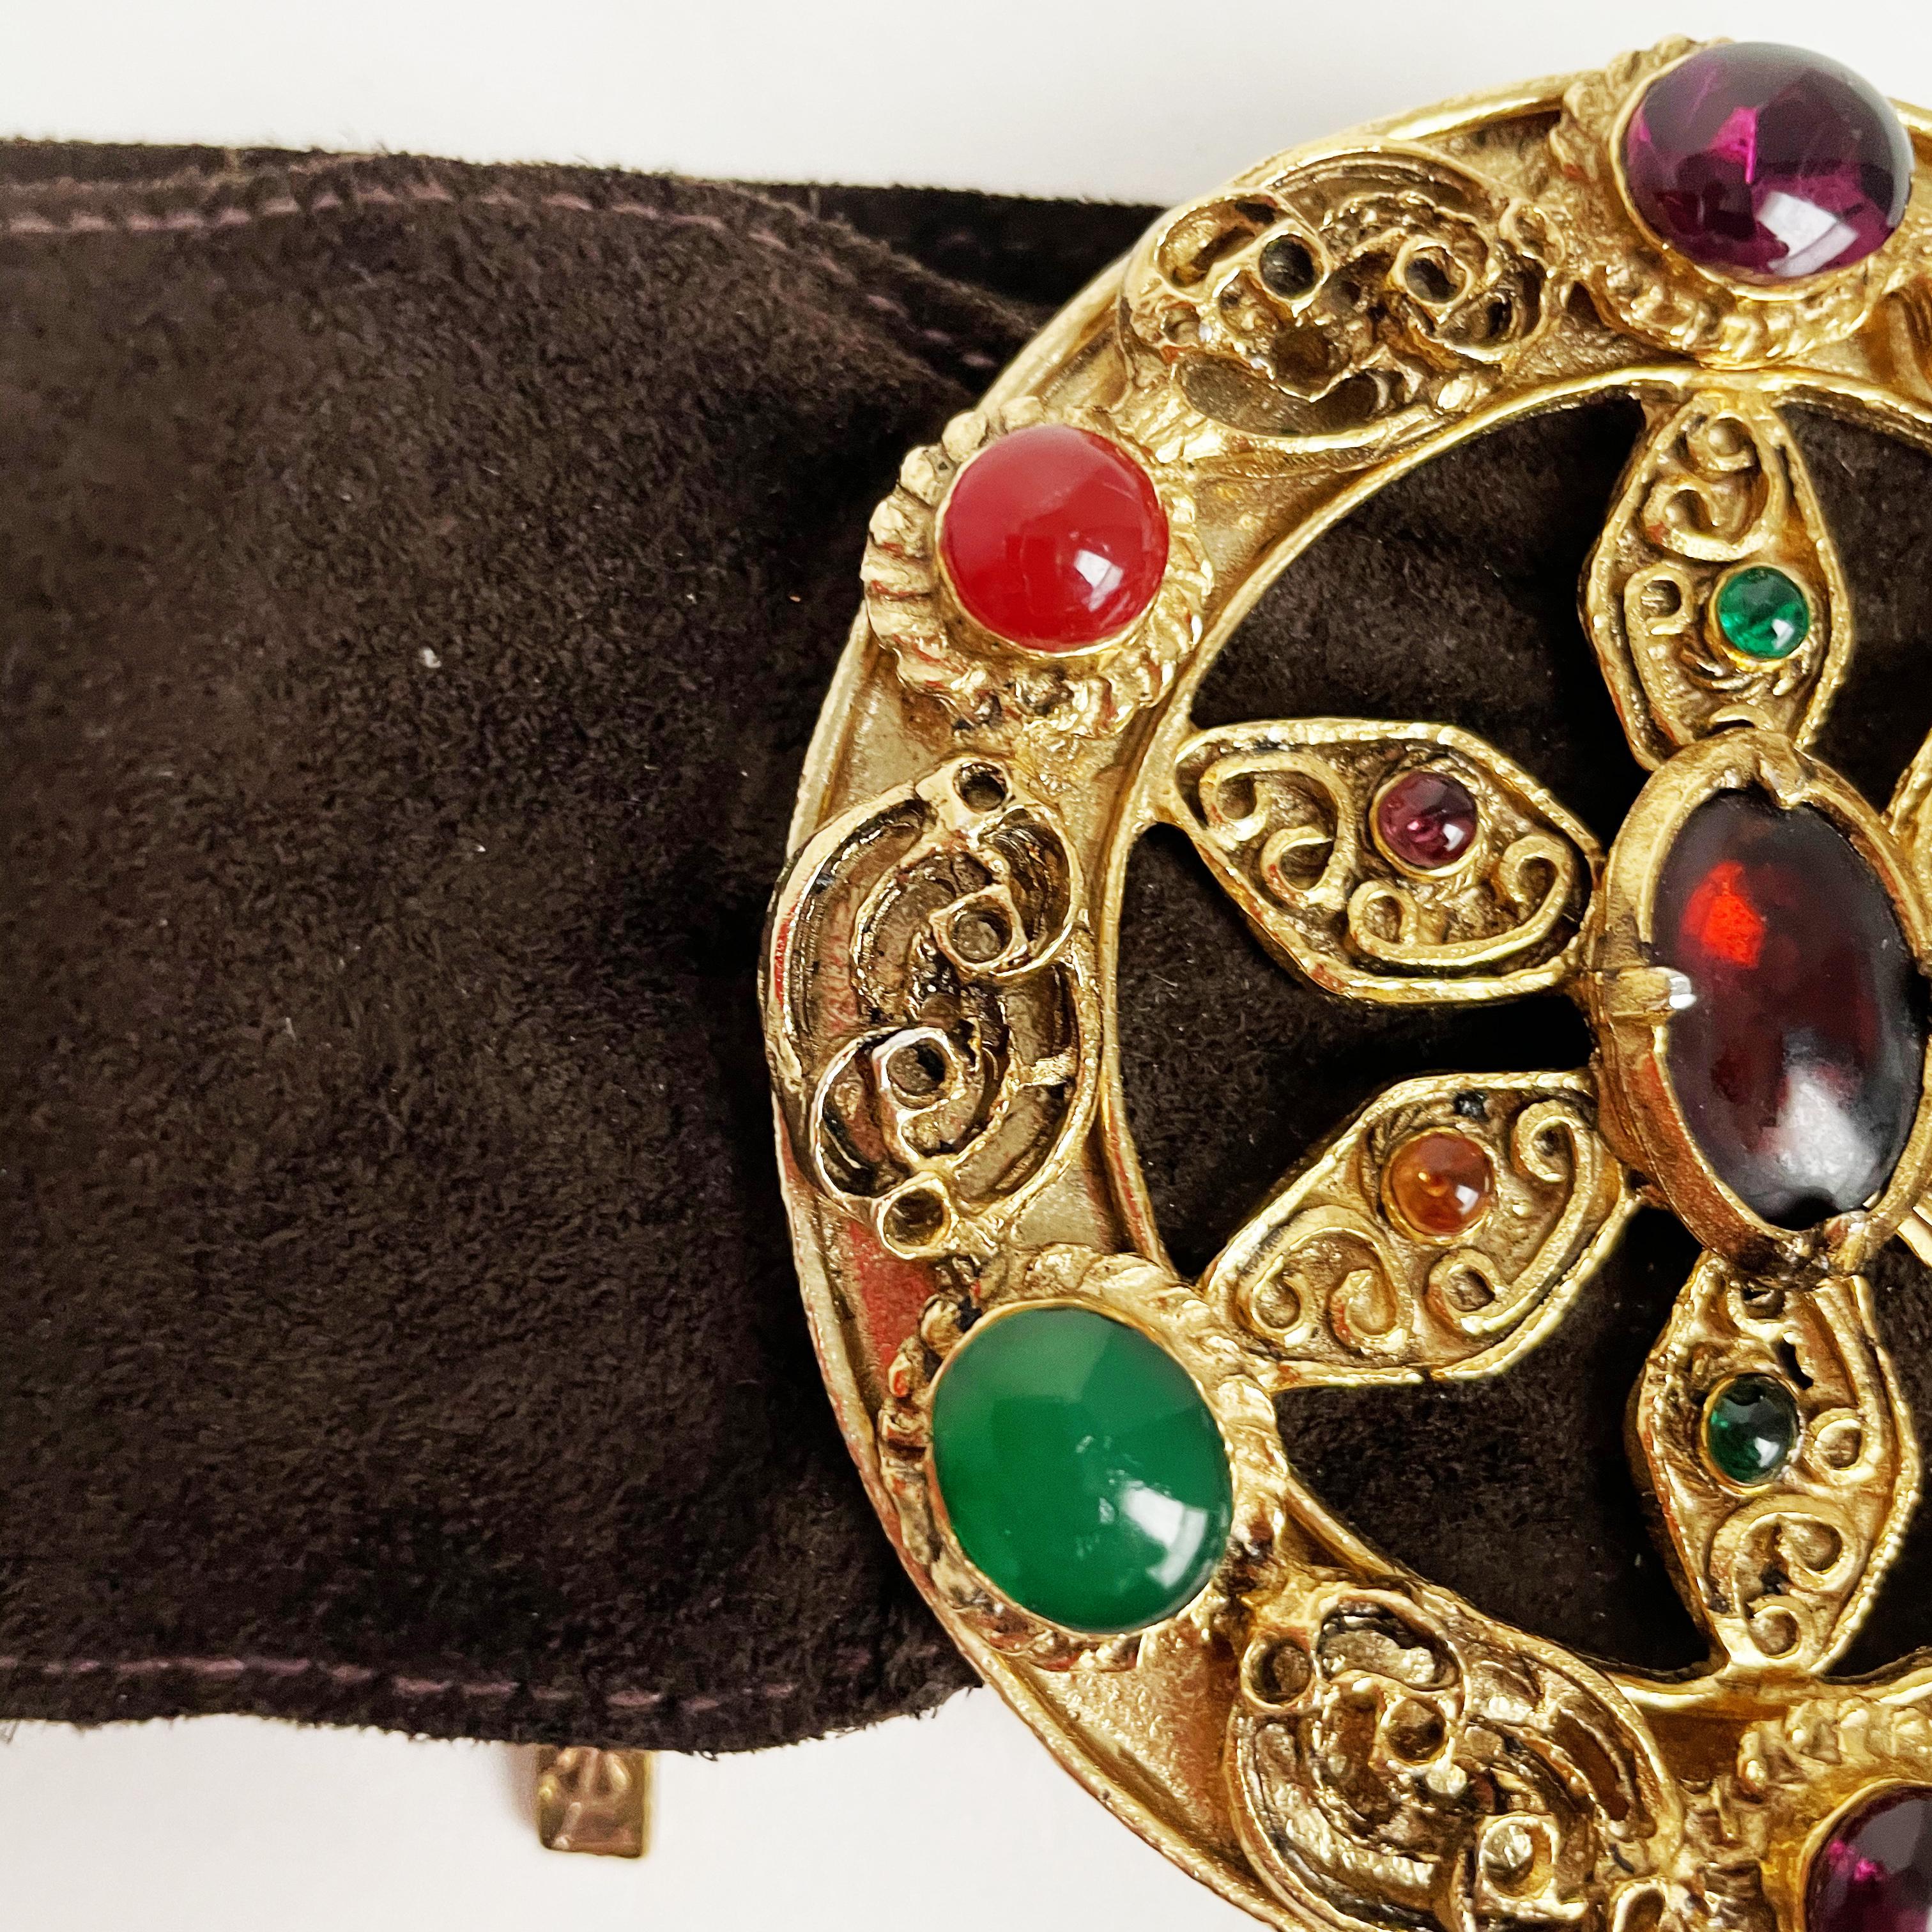 Yves Saint Laurent Belt Colorful Glass Cabochons Buckle Suede Leather 70s S/M 10